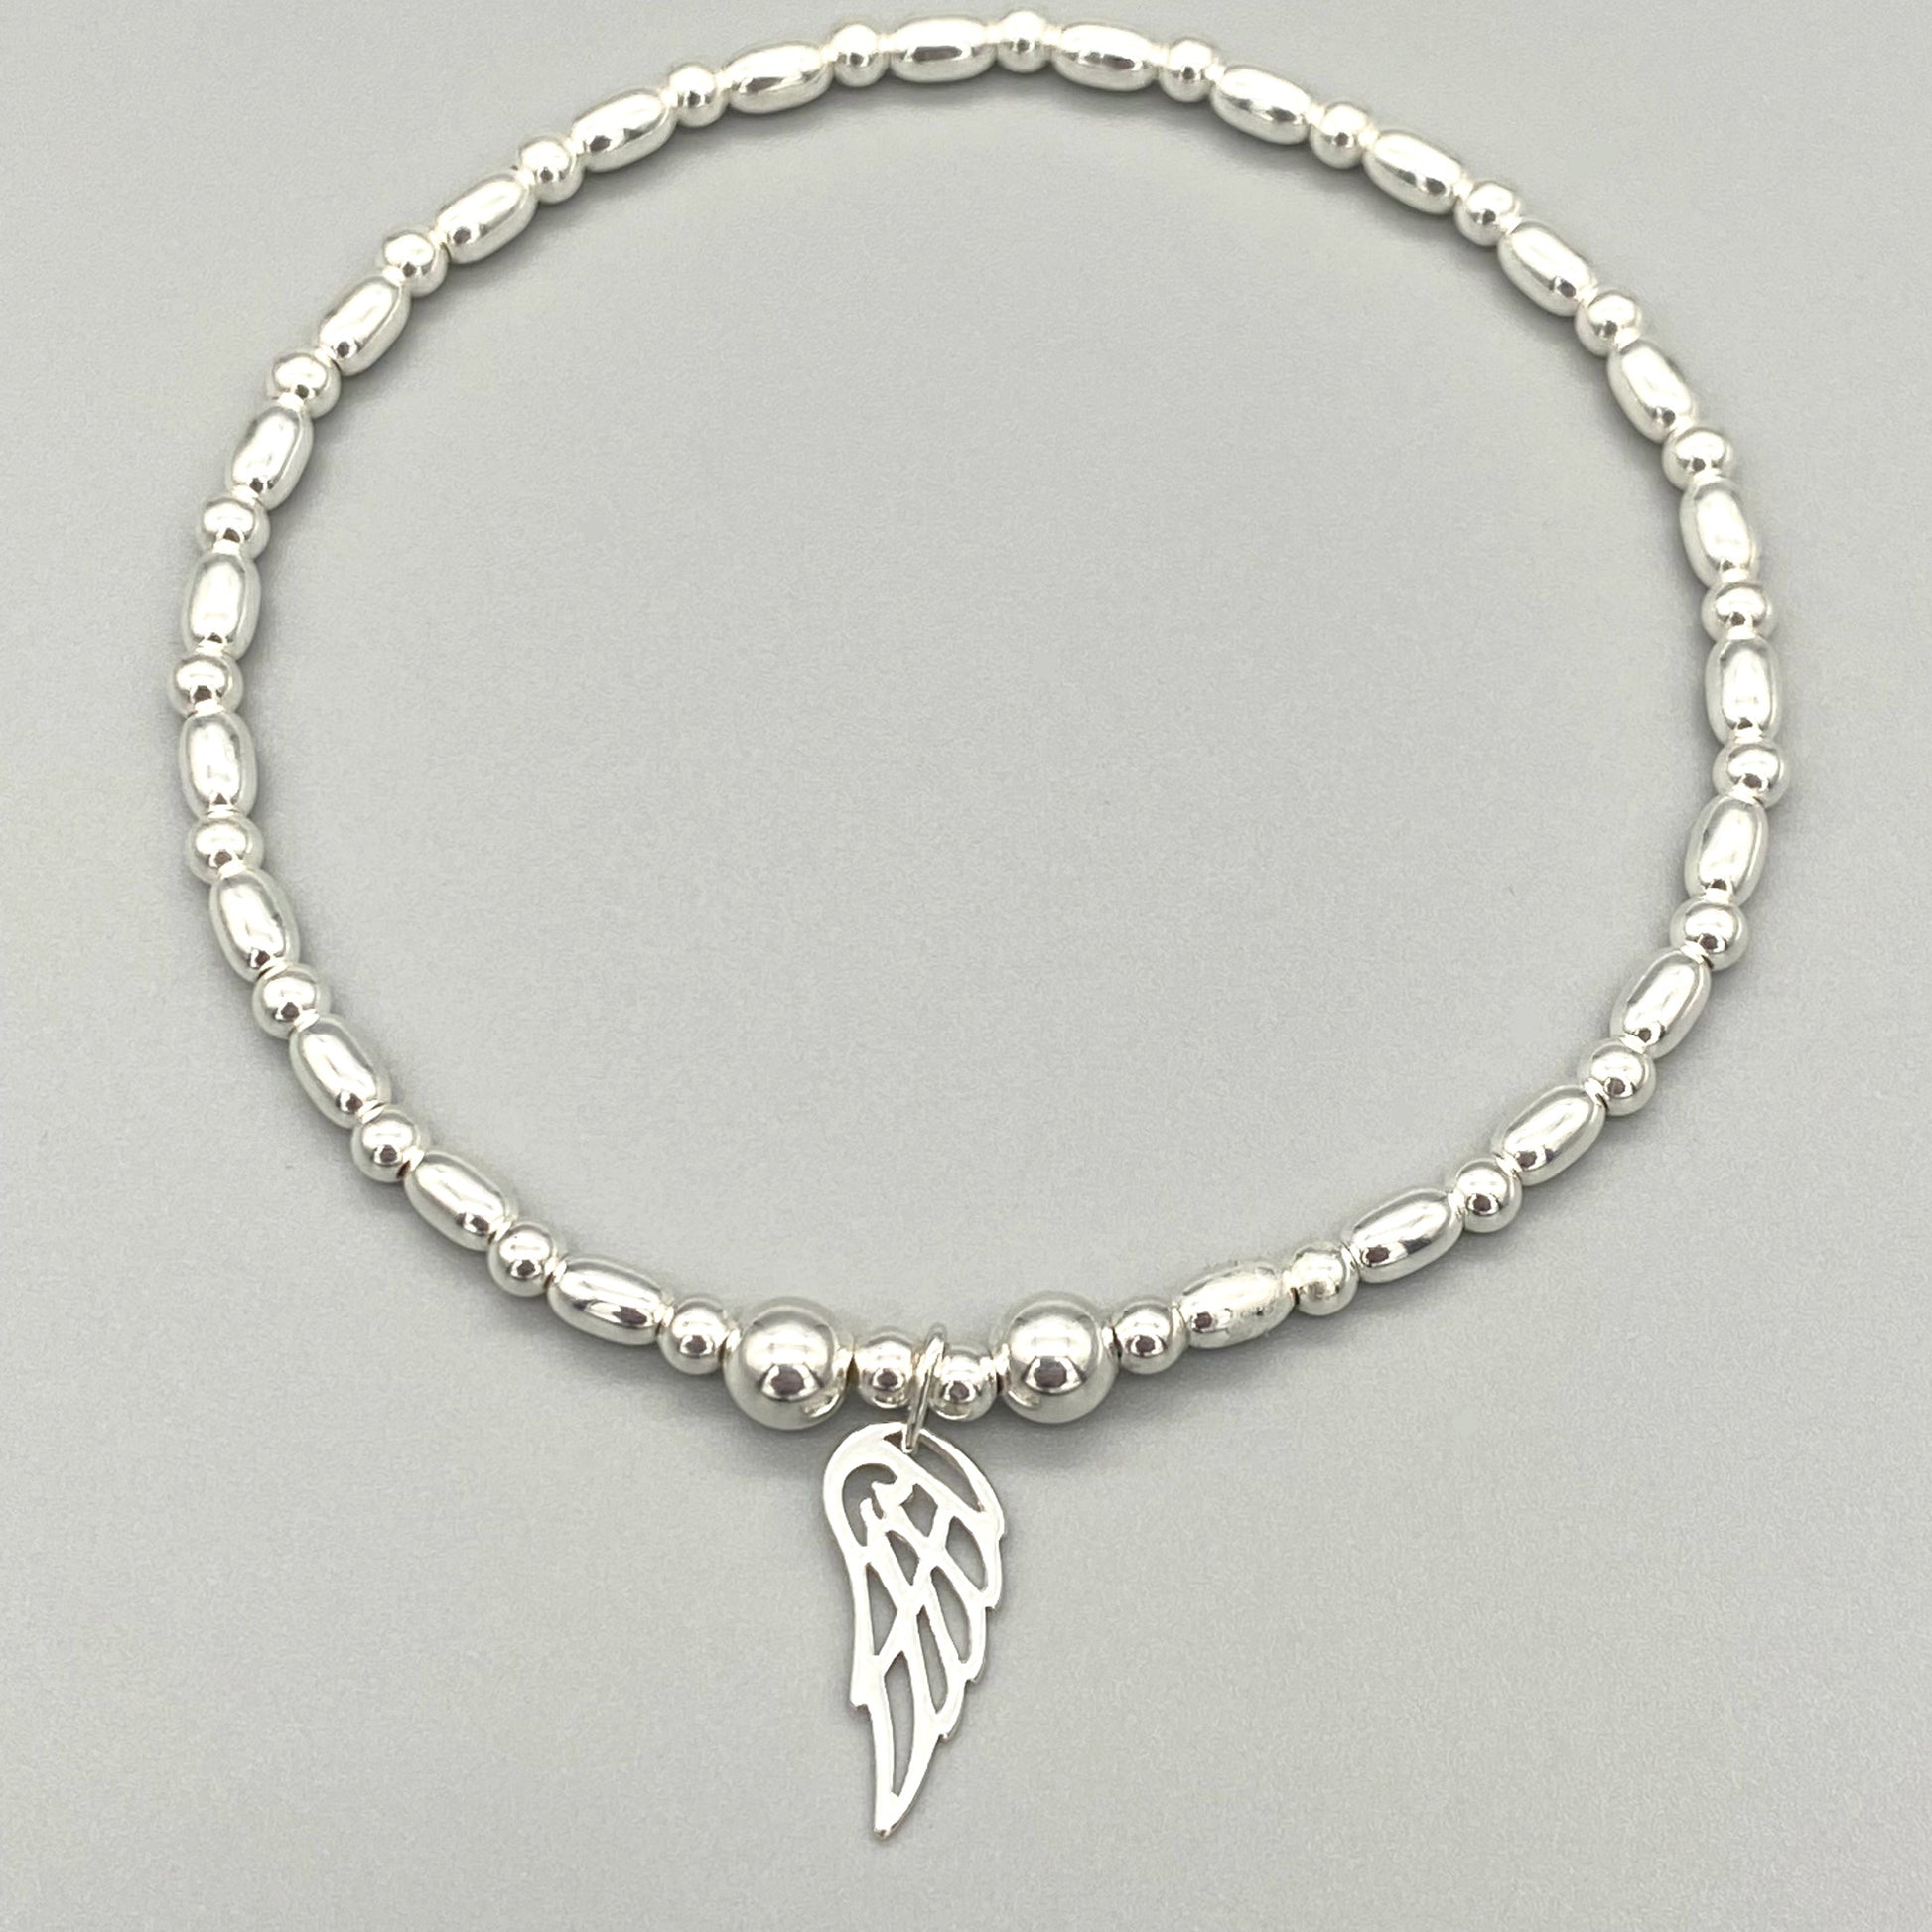 Angel wing charm women's sterling silver stacking bracelet by My Silver Wish